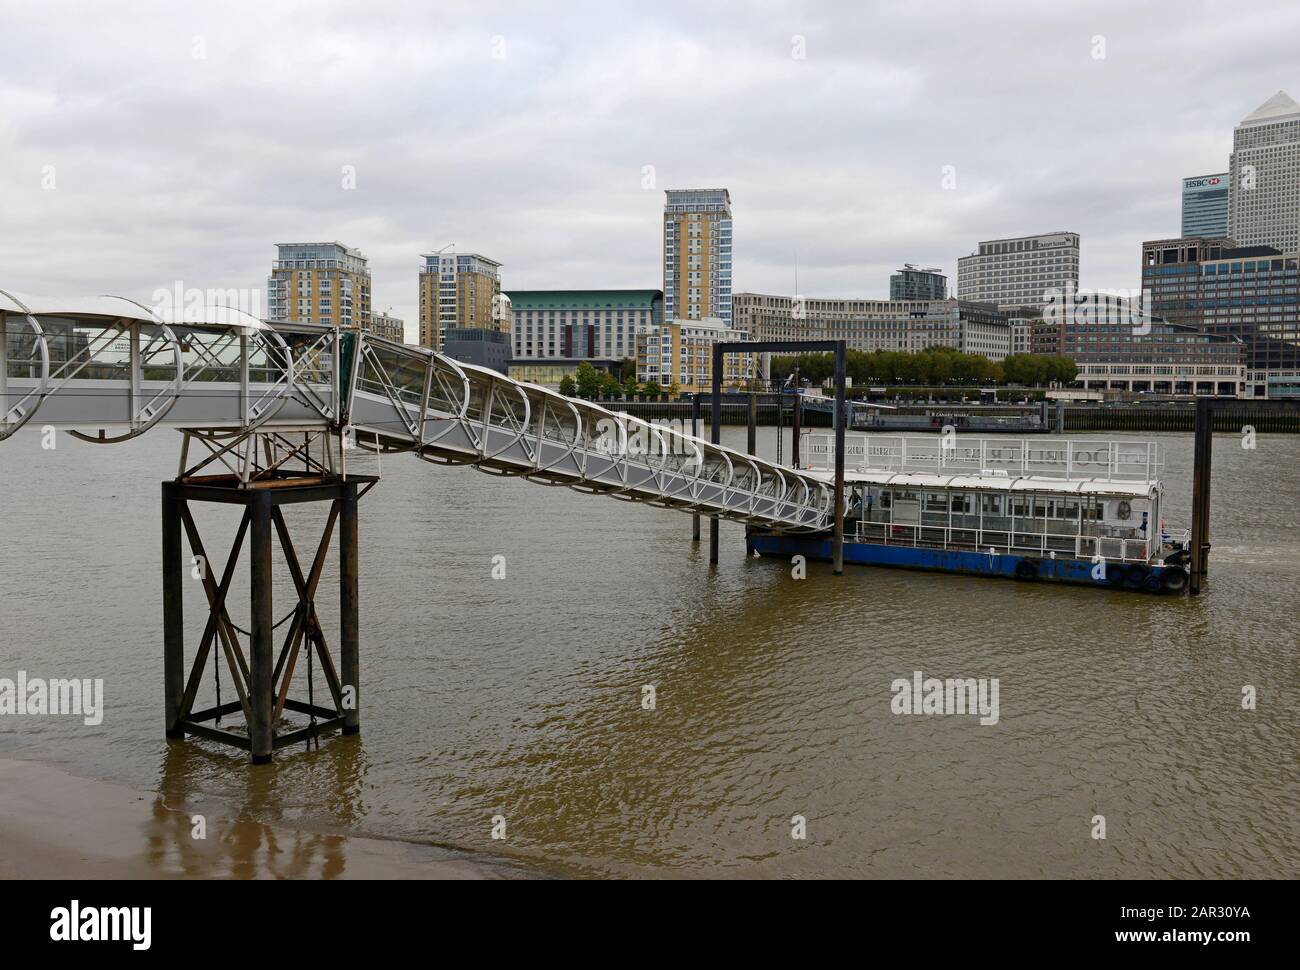 A ferry waits at Nelson Dock Pier to travel across the Thames river to Canary Wharf, London, UK Stock Photo